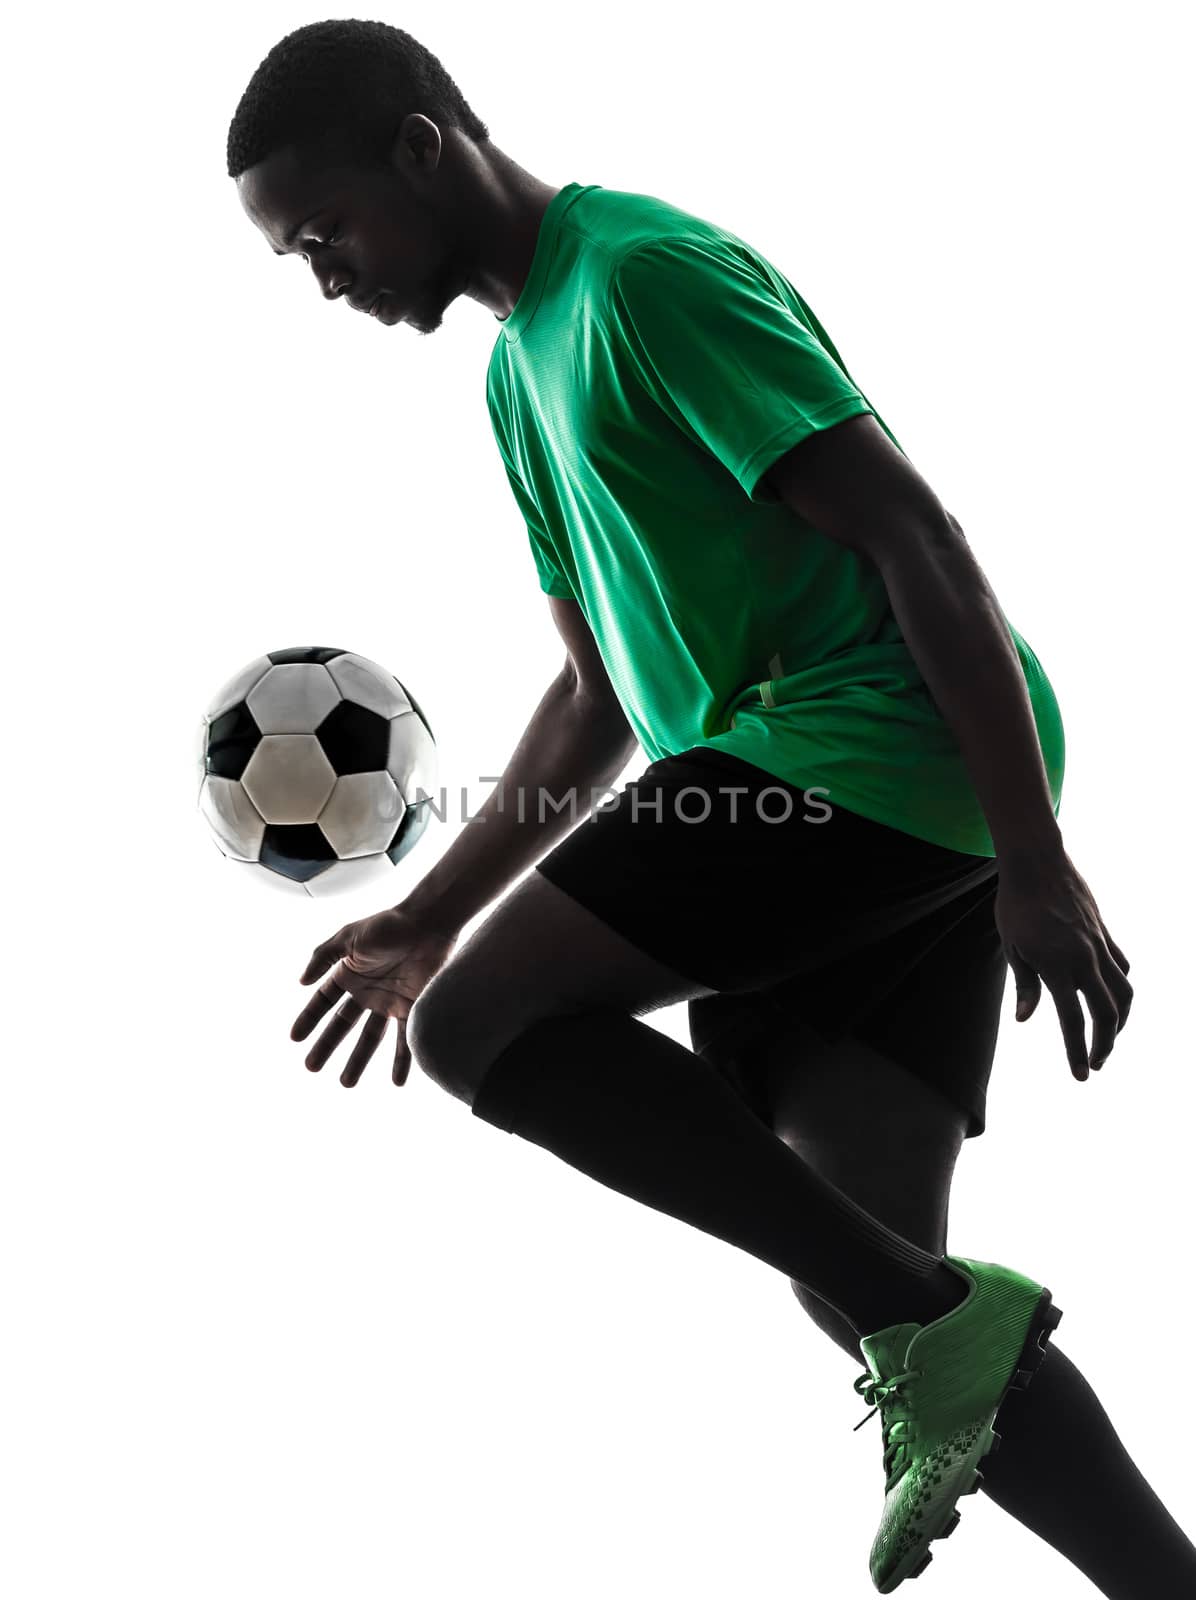 african man soccer player  juggling silhouette by PIXSTILL